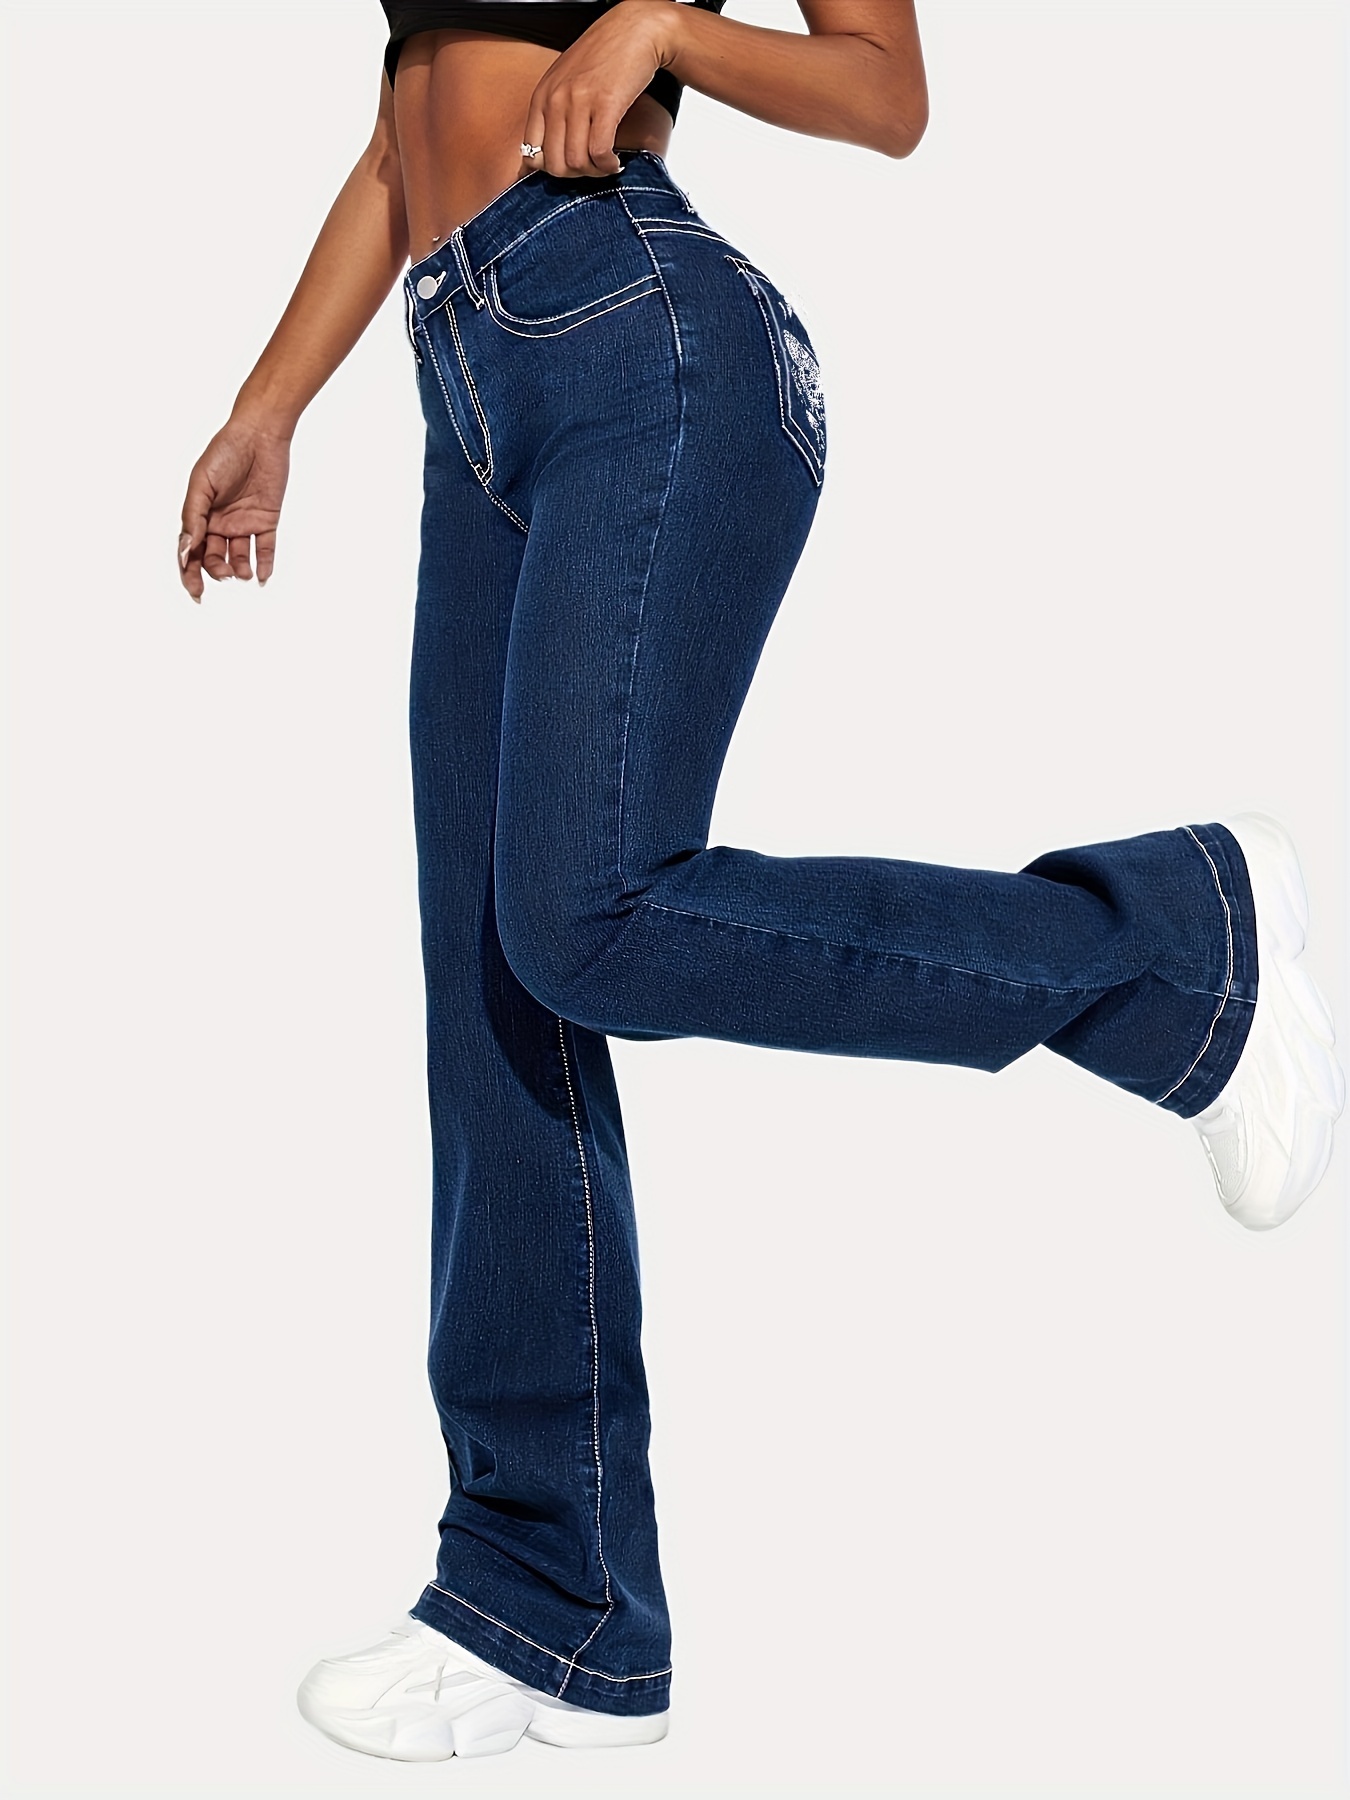 Mguotp Butt Lifting Jeans Stretchy Jeans for Women Long Jeans